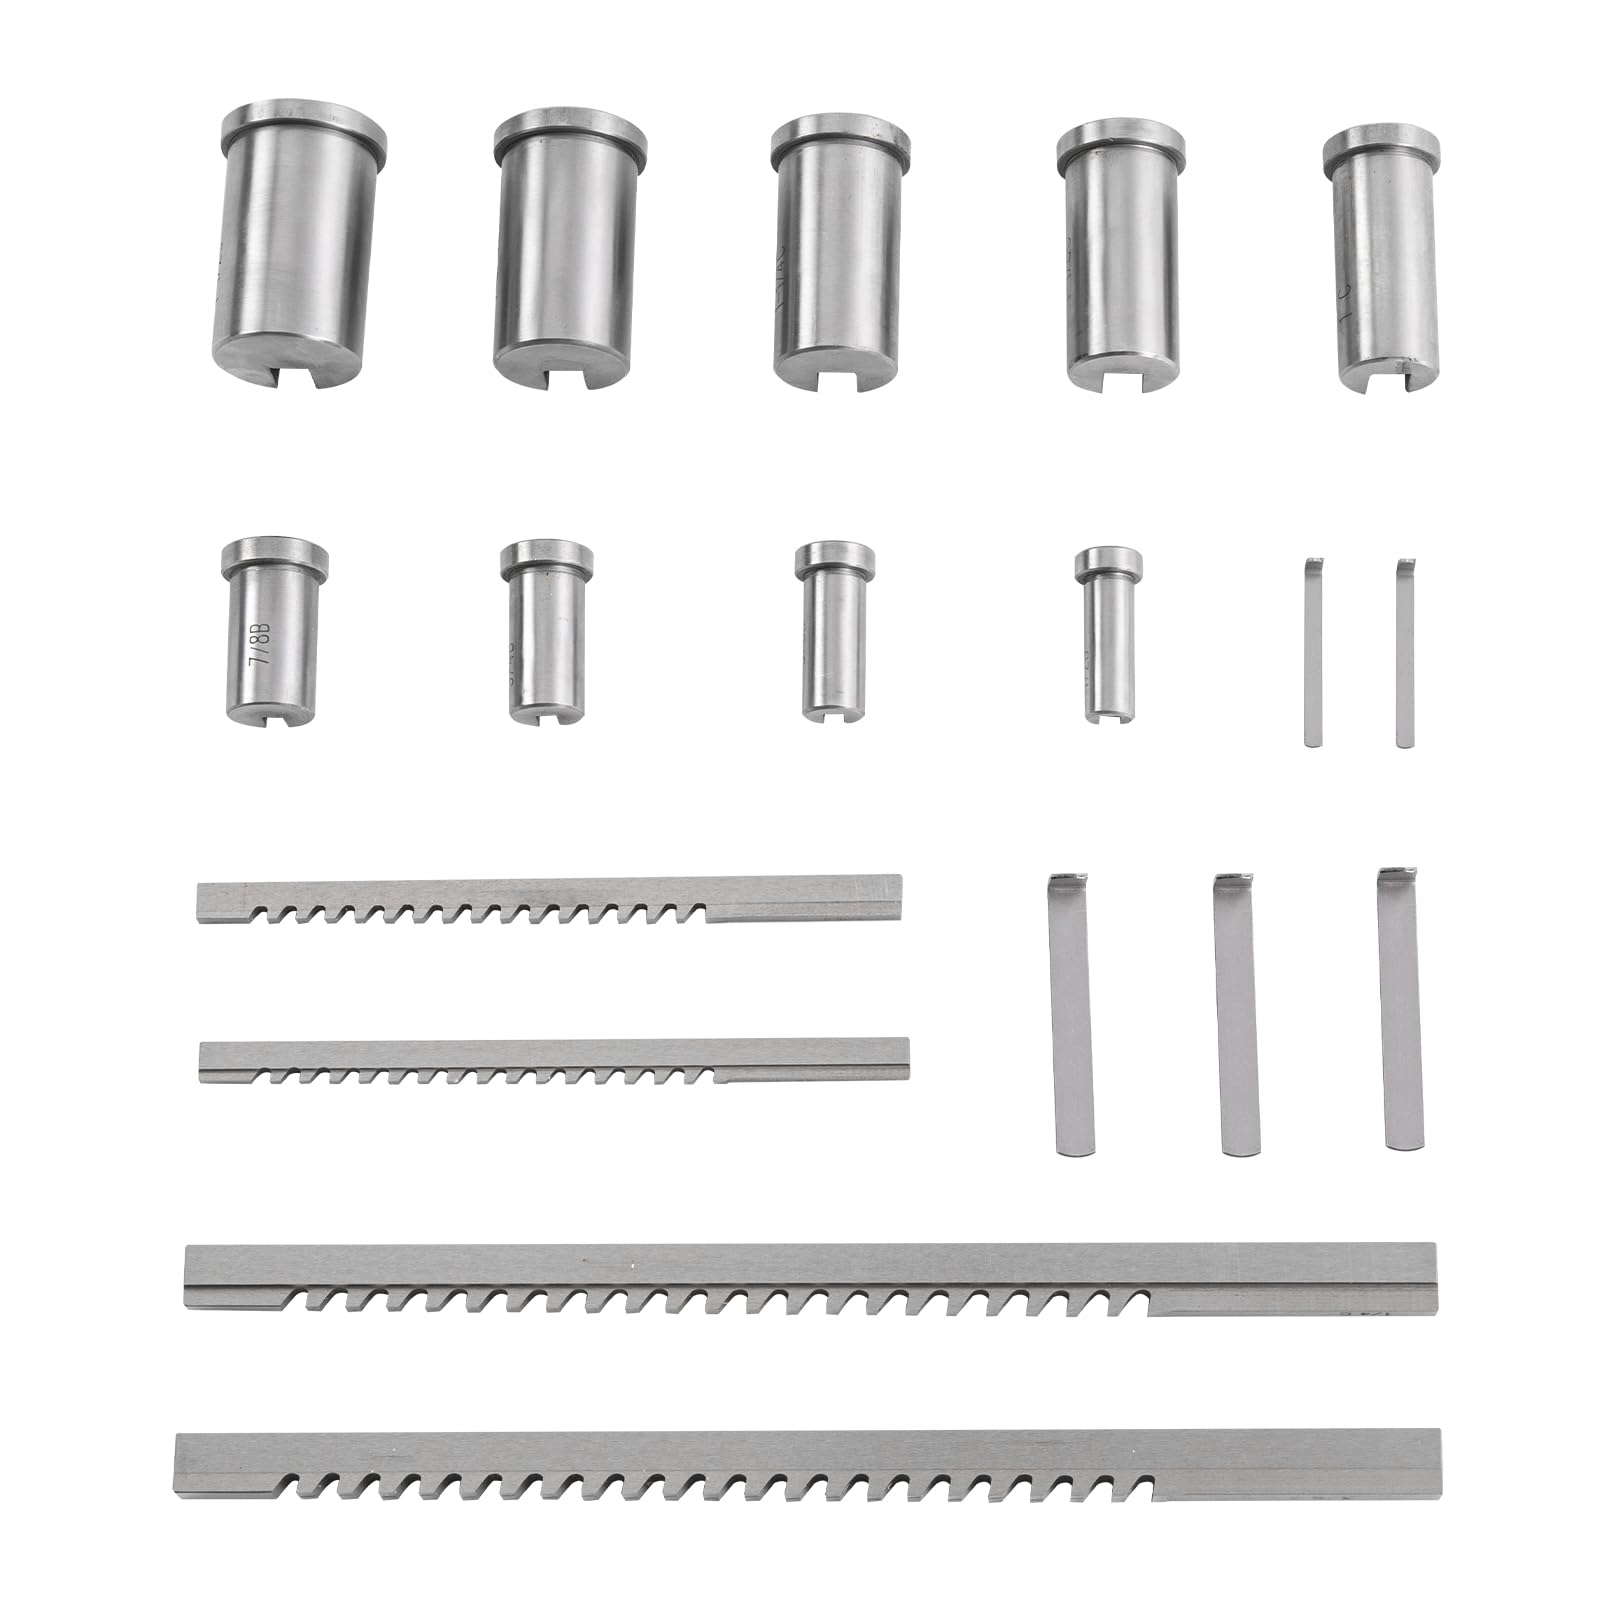 Keyway Broach Kit 18pcs Inch Size Keyway Broach Cutter Broaching Cutter Cutting Tool Metalworking High Speed Steel Material in Fitted Box (US Stock)